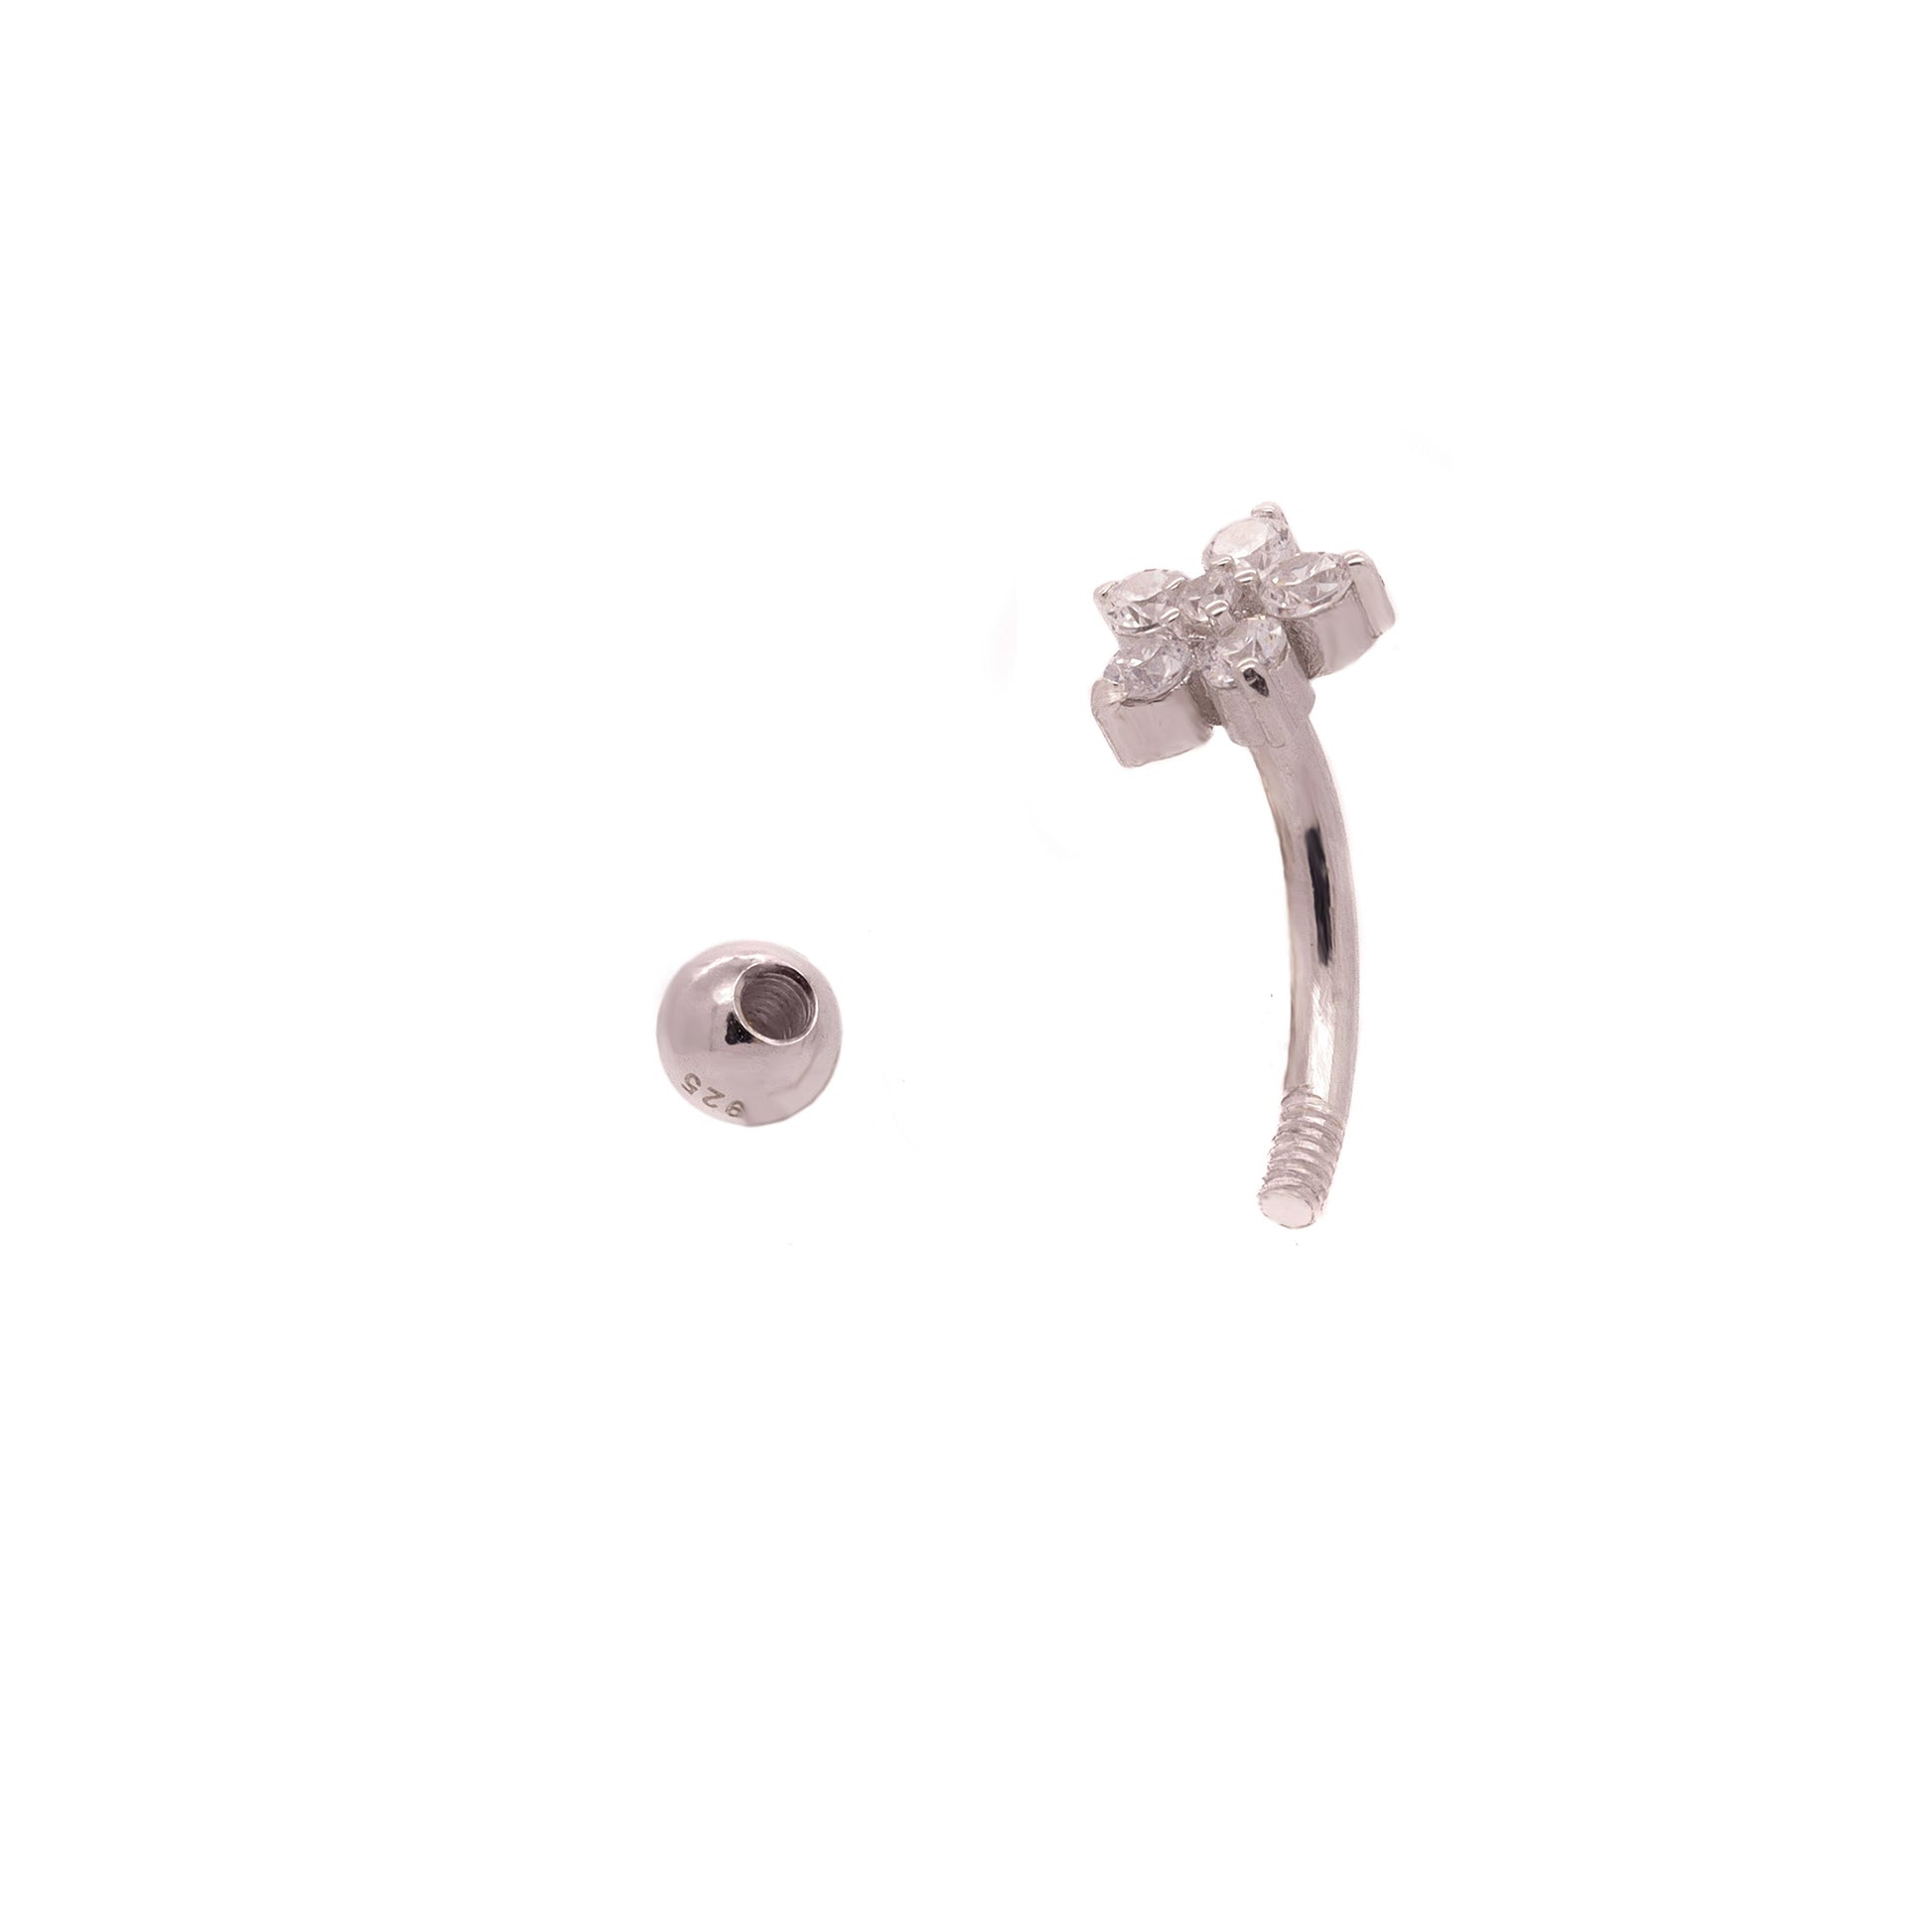 Solid 925 Silver | 16G 14G Petite Flower Reverse Belly Ring | 6mm 1/4" 8mm 5/16" 10mm 3/8" 12mm 15/32" - Sturdy South